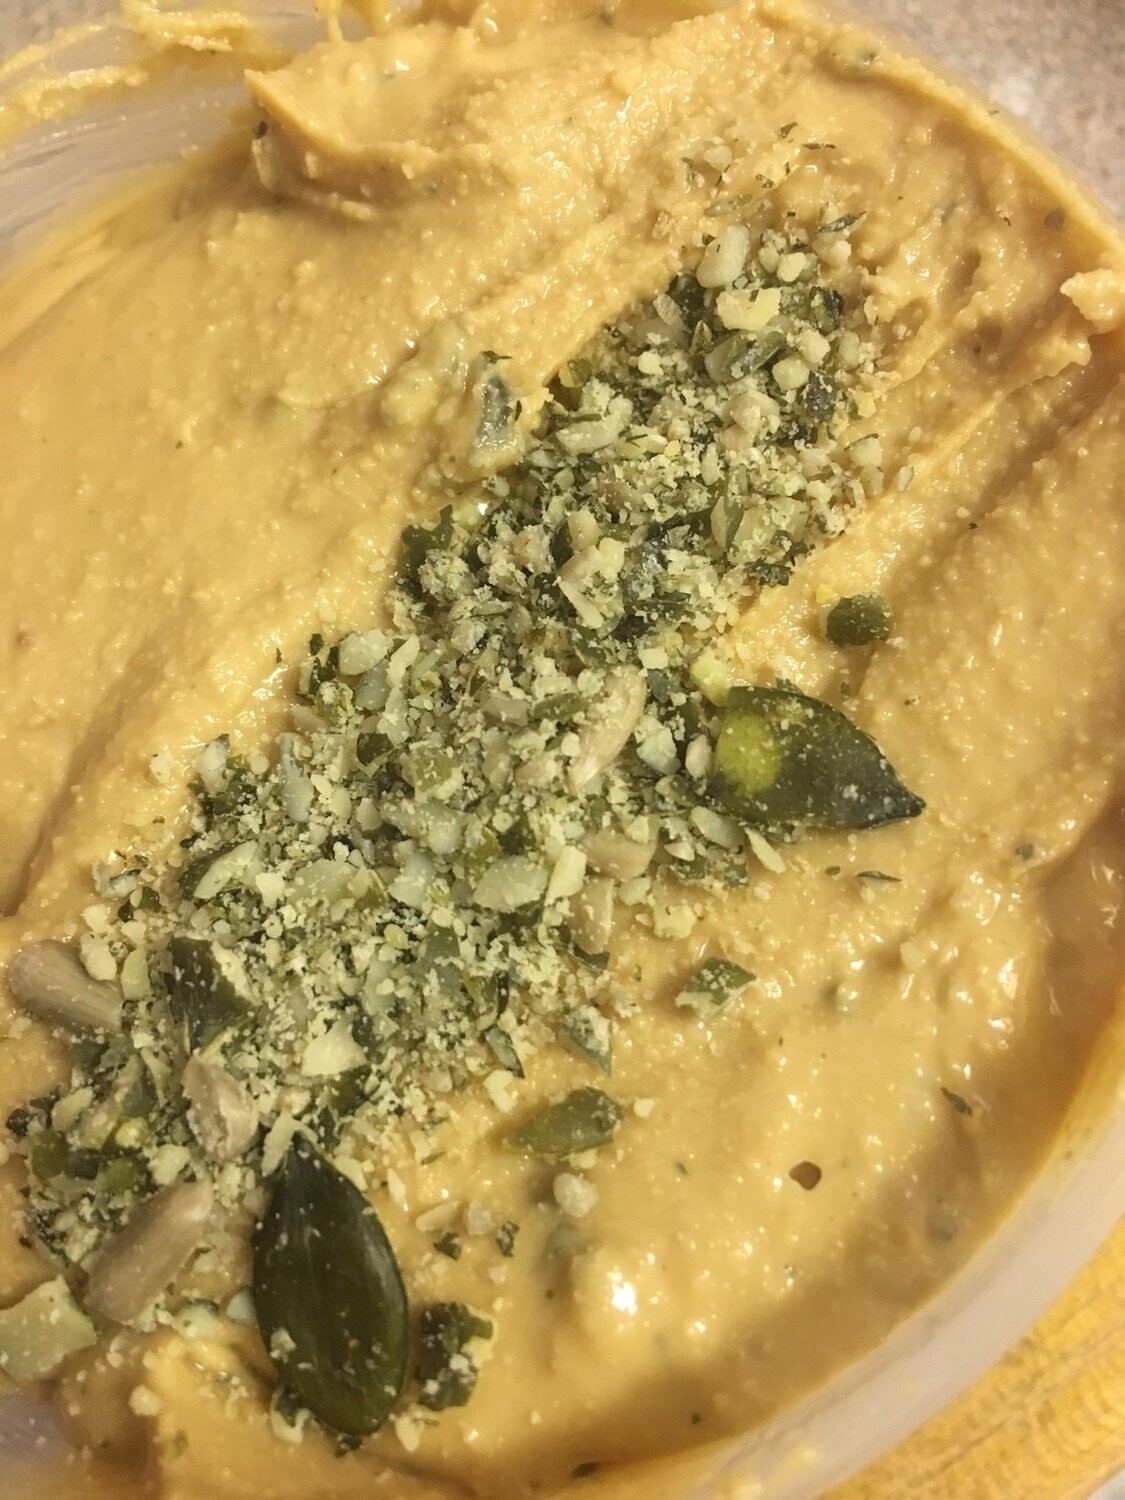 Seeded Peanut Butter (nothing but Peanuts!) Chilli 350g